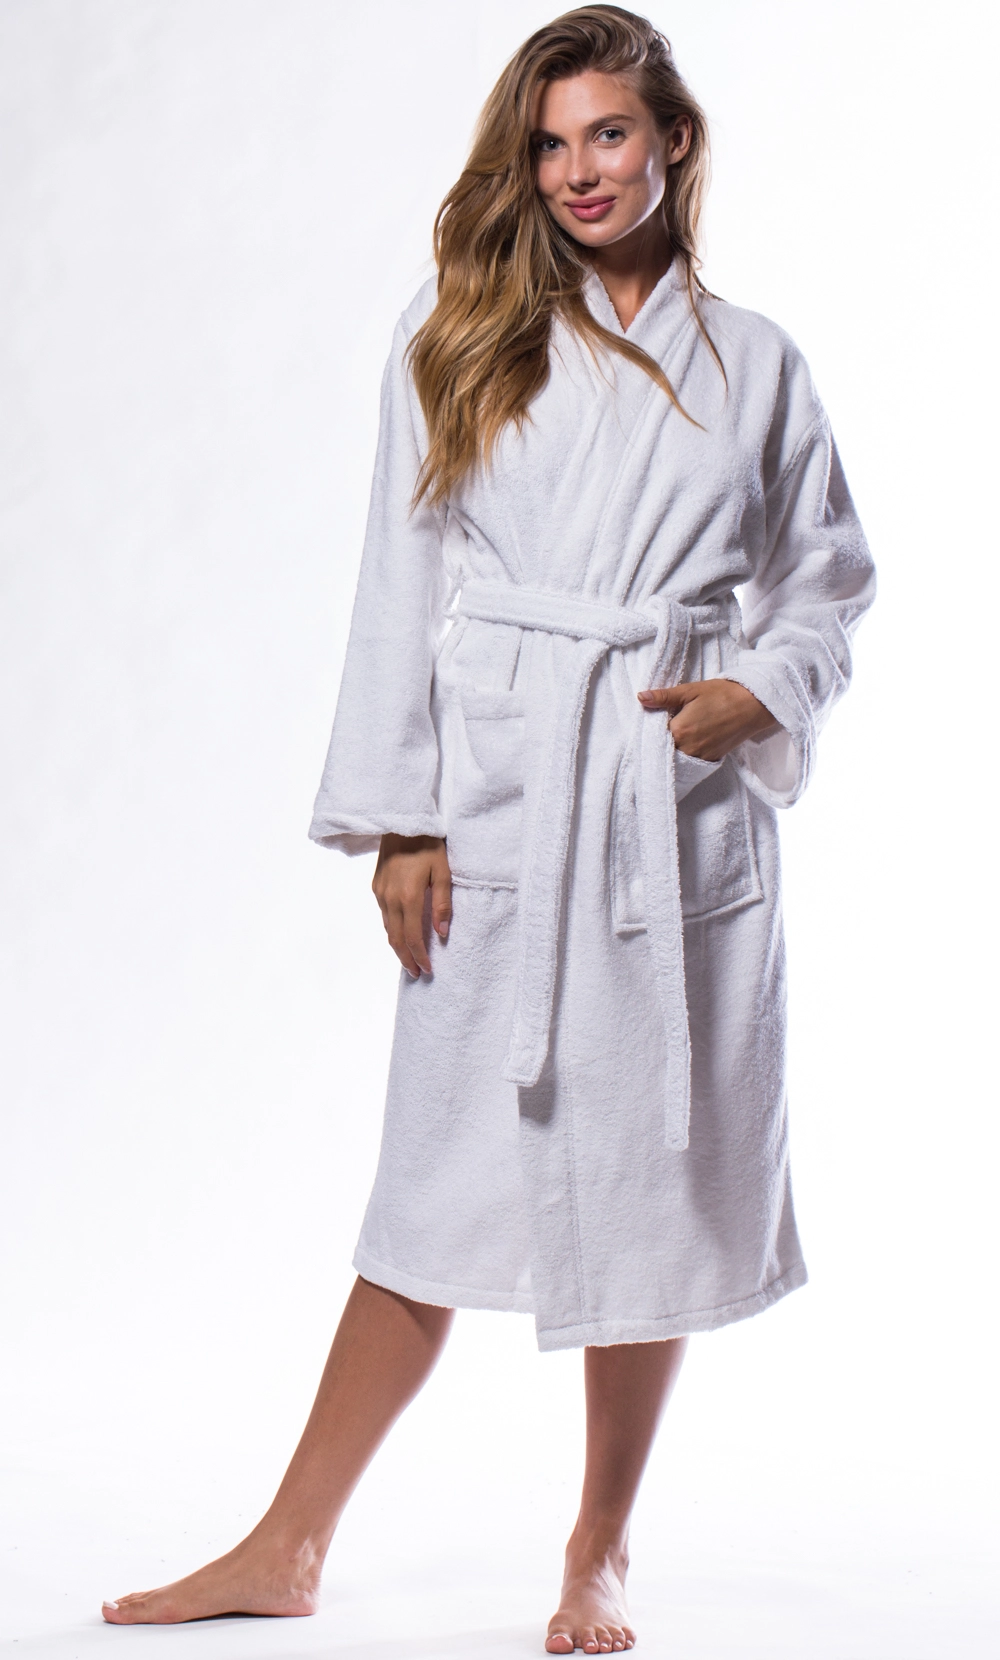 Buy Ladies Nightwear Robes, Kimonos & Dressing Gowns, Free Delivery